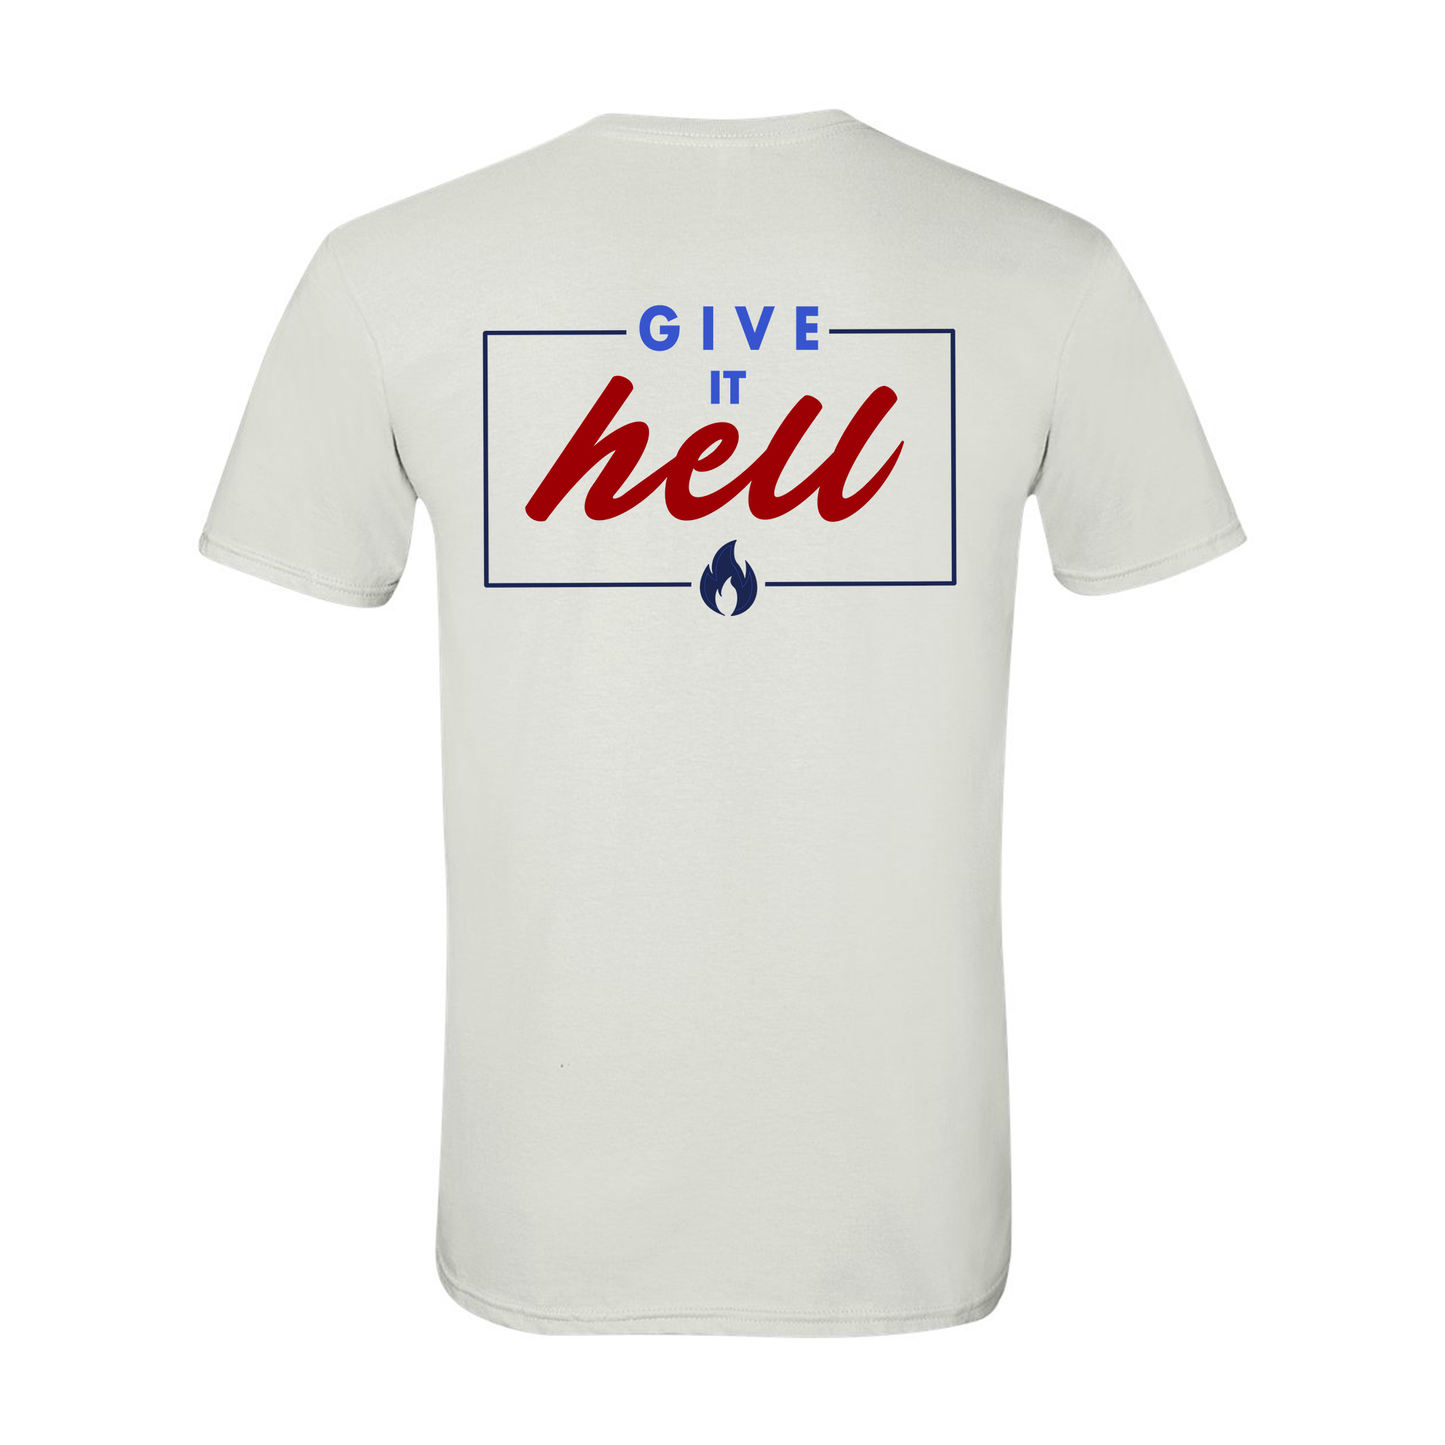 Give It Hell Tee